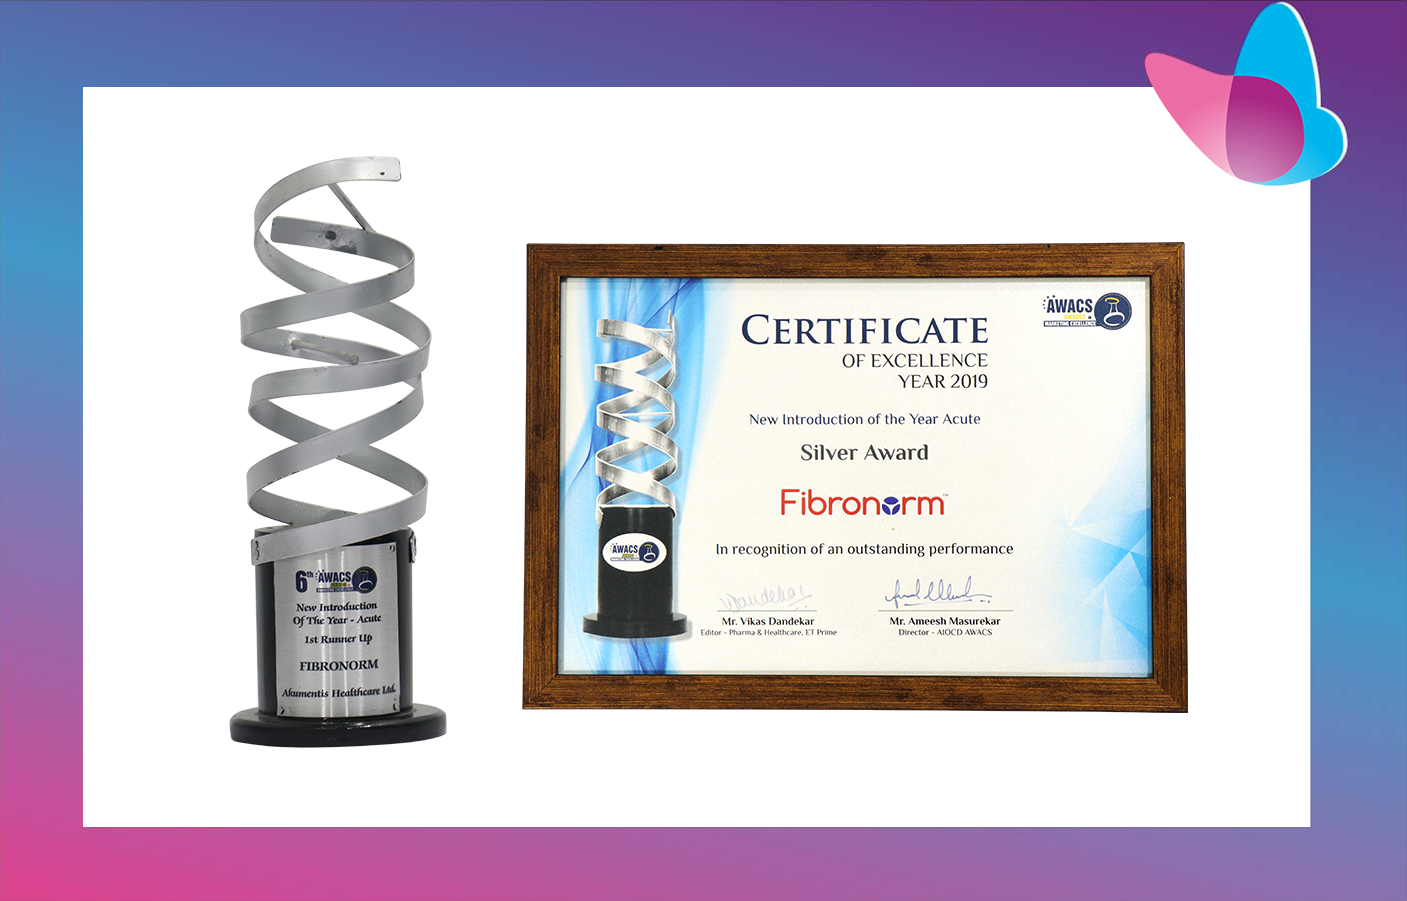 Akumentis Healthcare got the New Introduction of the Year Acute SILVER Award Fibronorm.